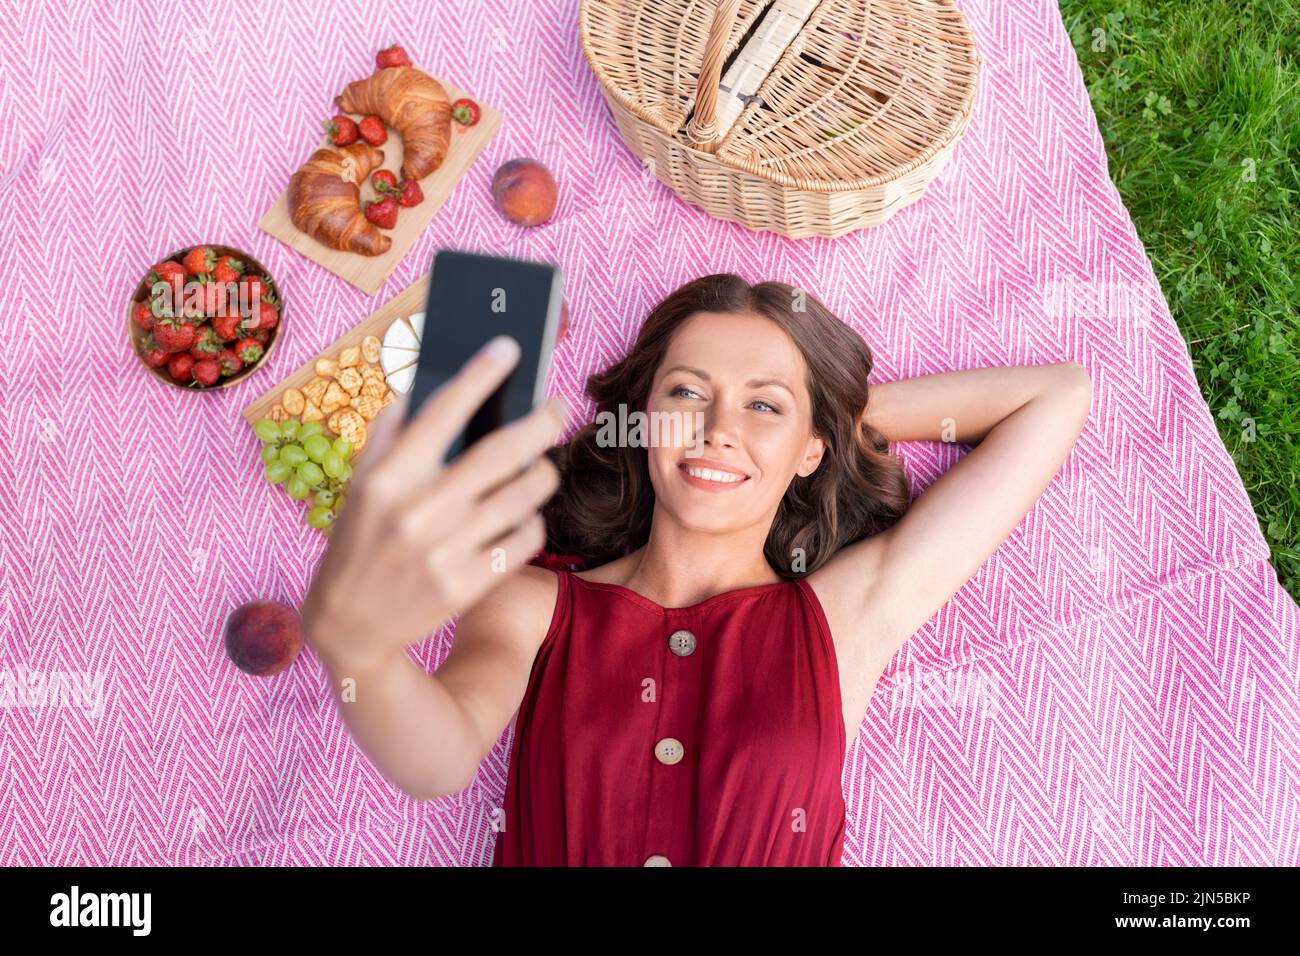 happy woman with smartphone taking selfie at park Stock Photo